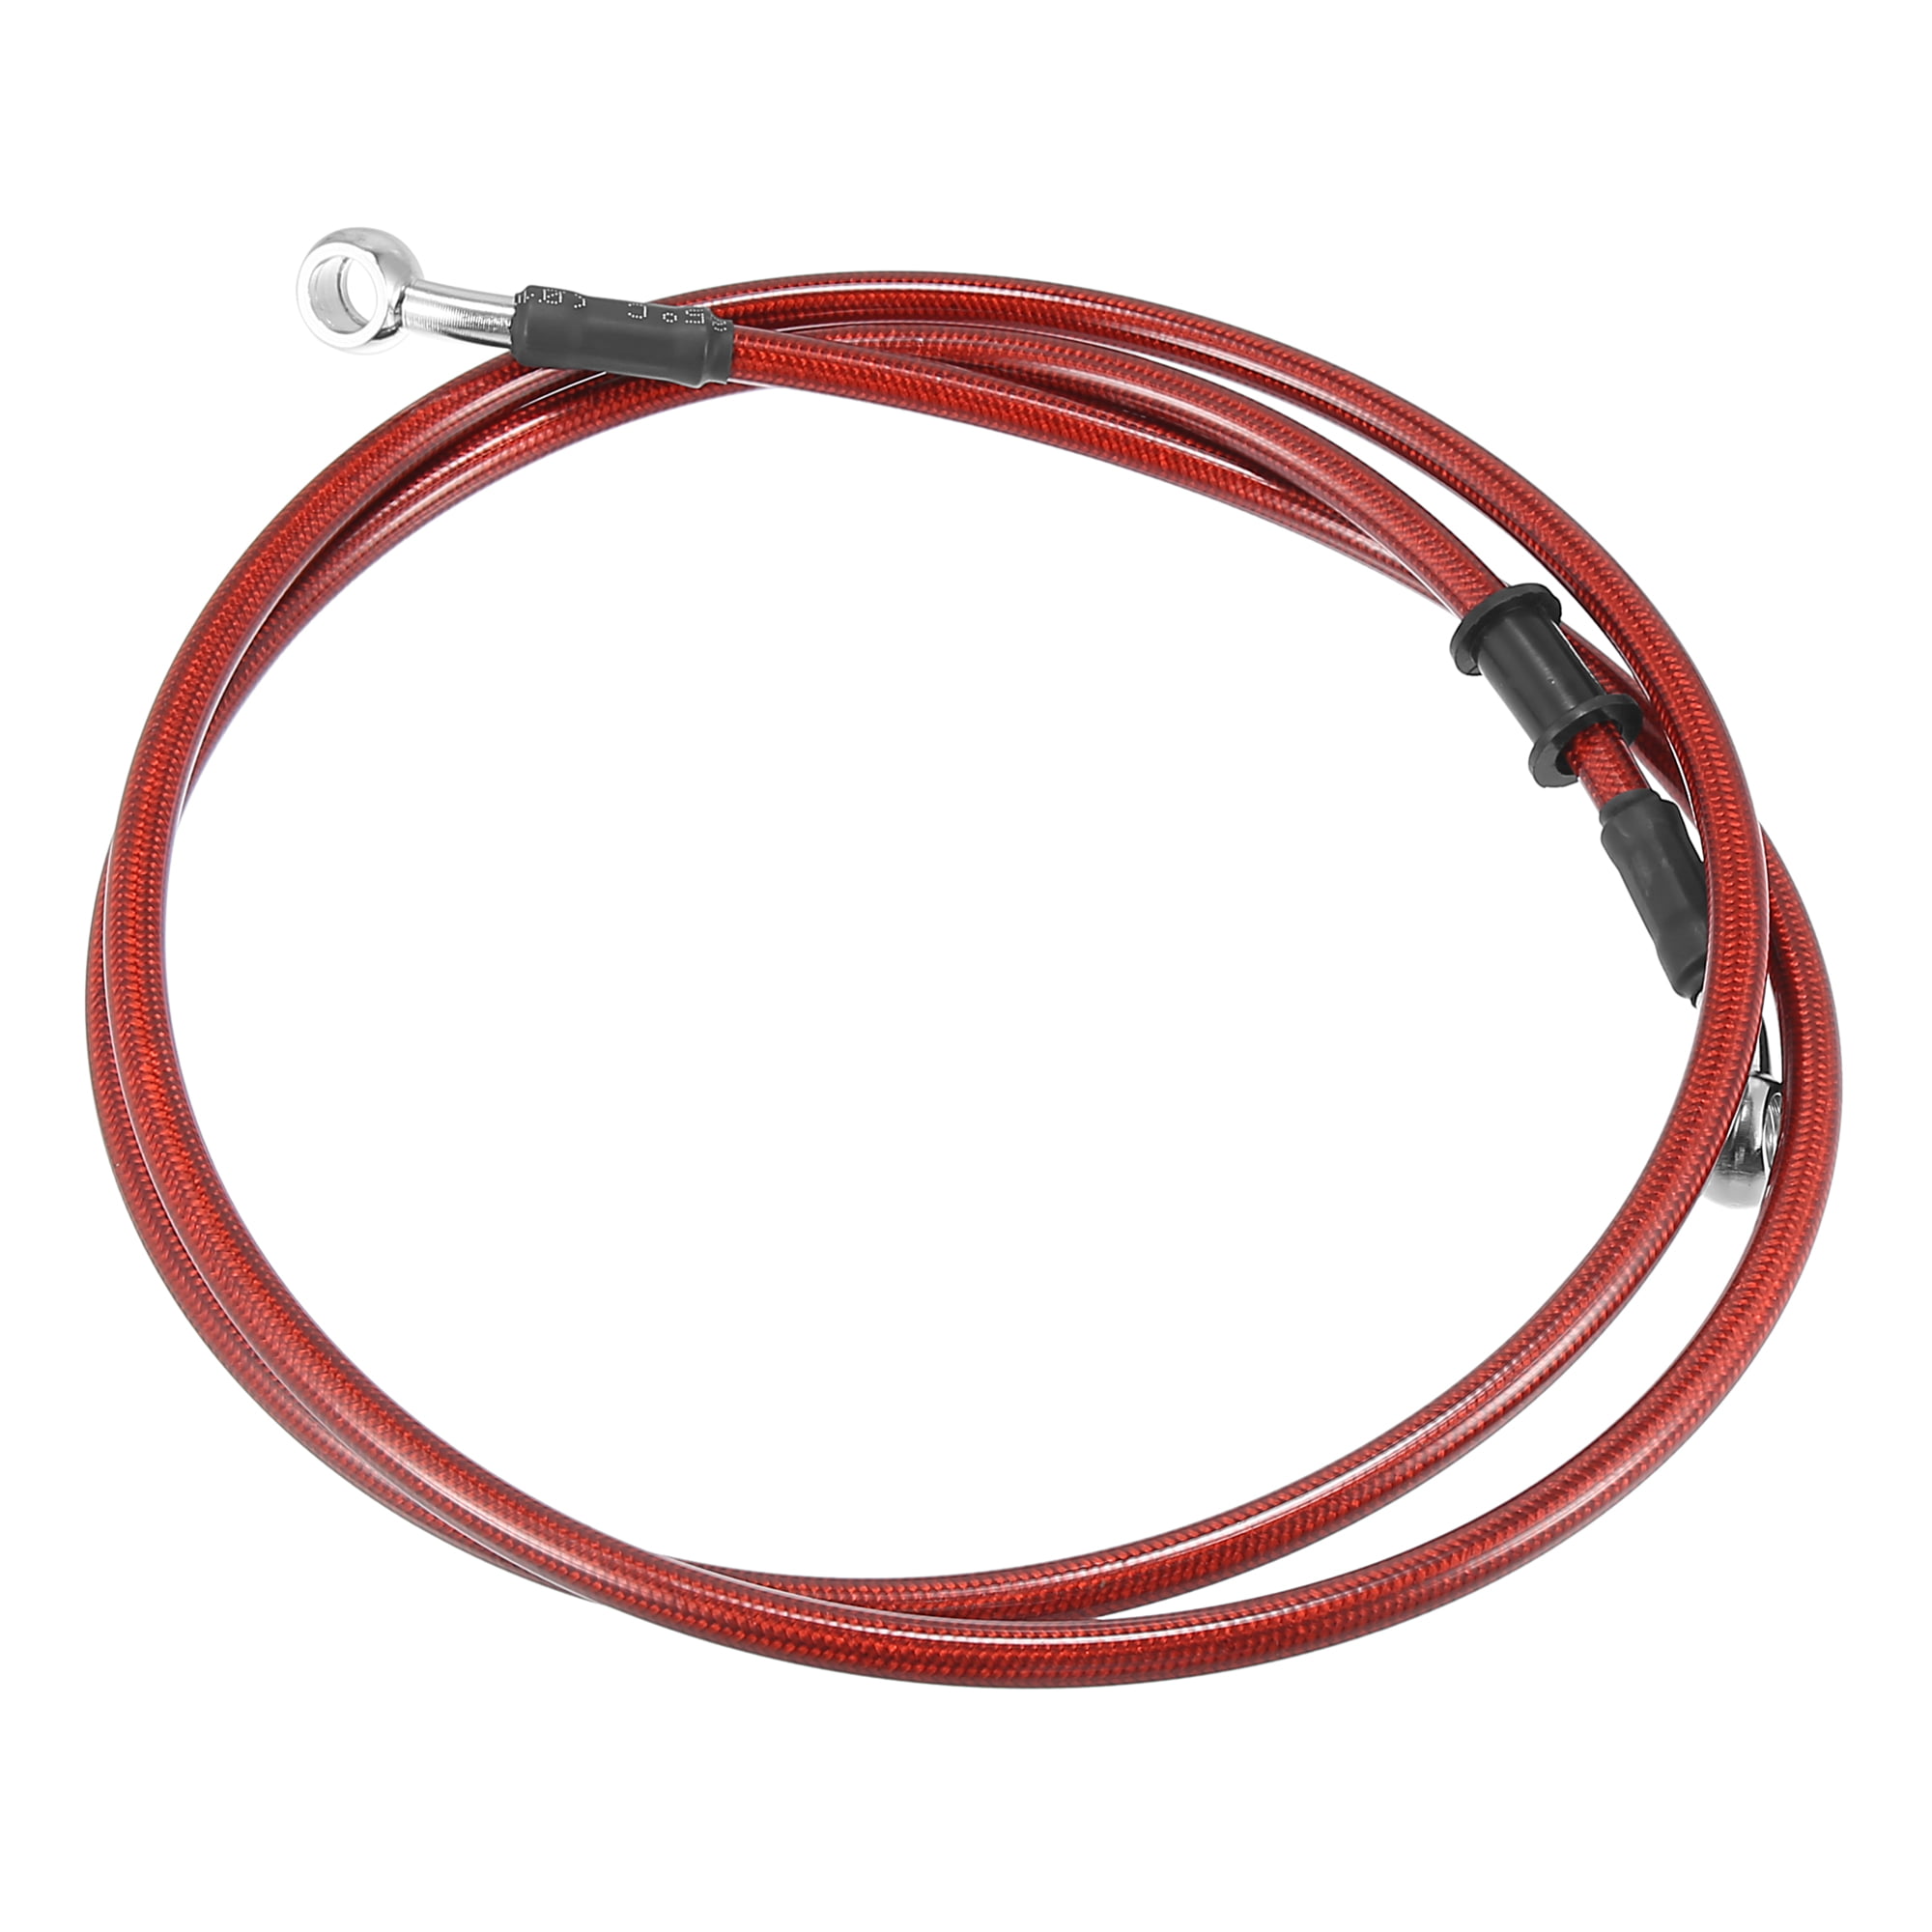 Motoforti 150cm 59.06 10mm Motorcycle Braided Brake Clutch Oil Hoses Line Pipe Clutch Throttle Gas Line Fuel Pipe Red for ATV Dirt Bike 